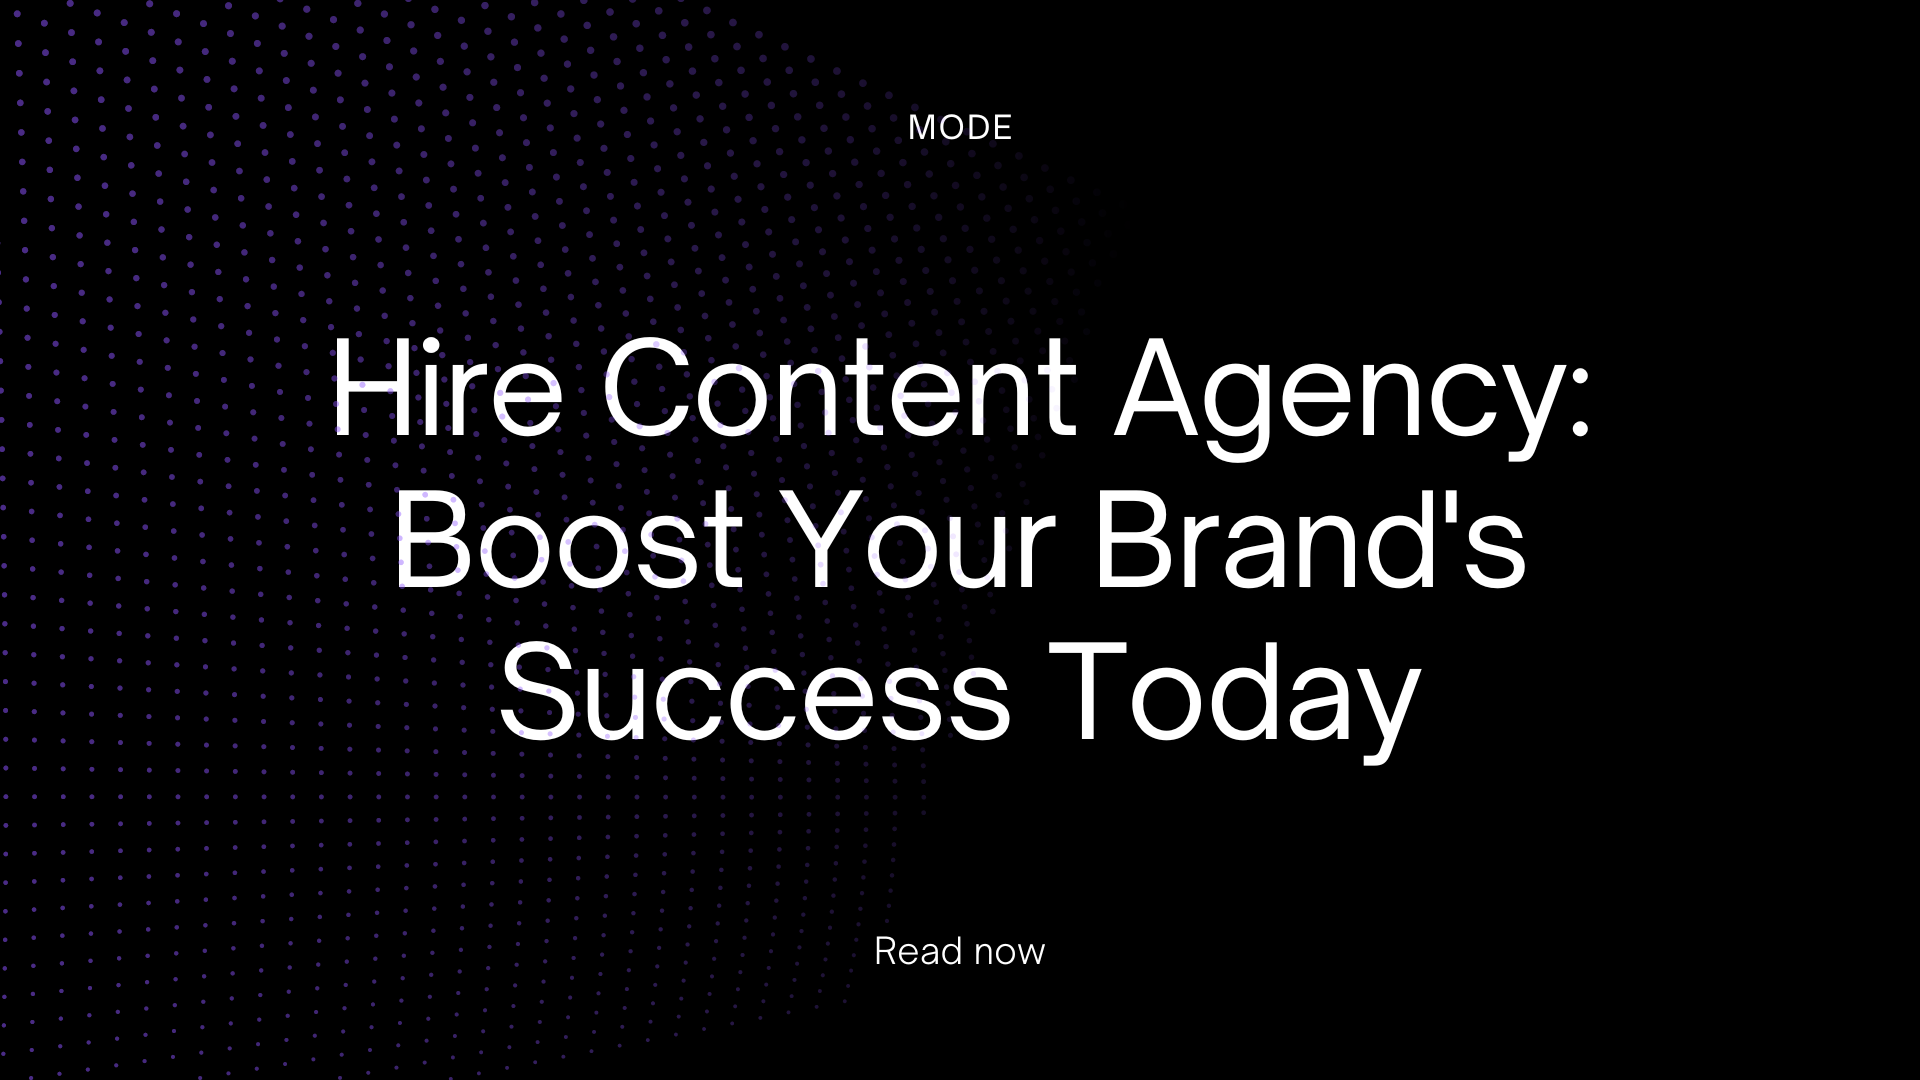 Hire Content Agency: Boost Your Brand's Success Today